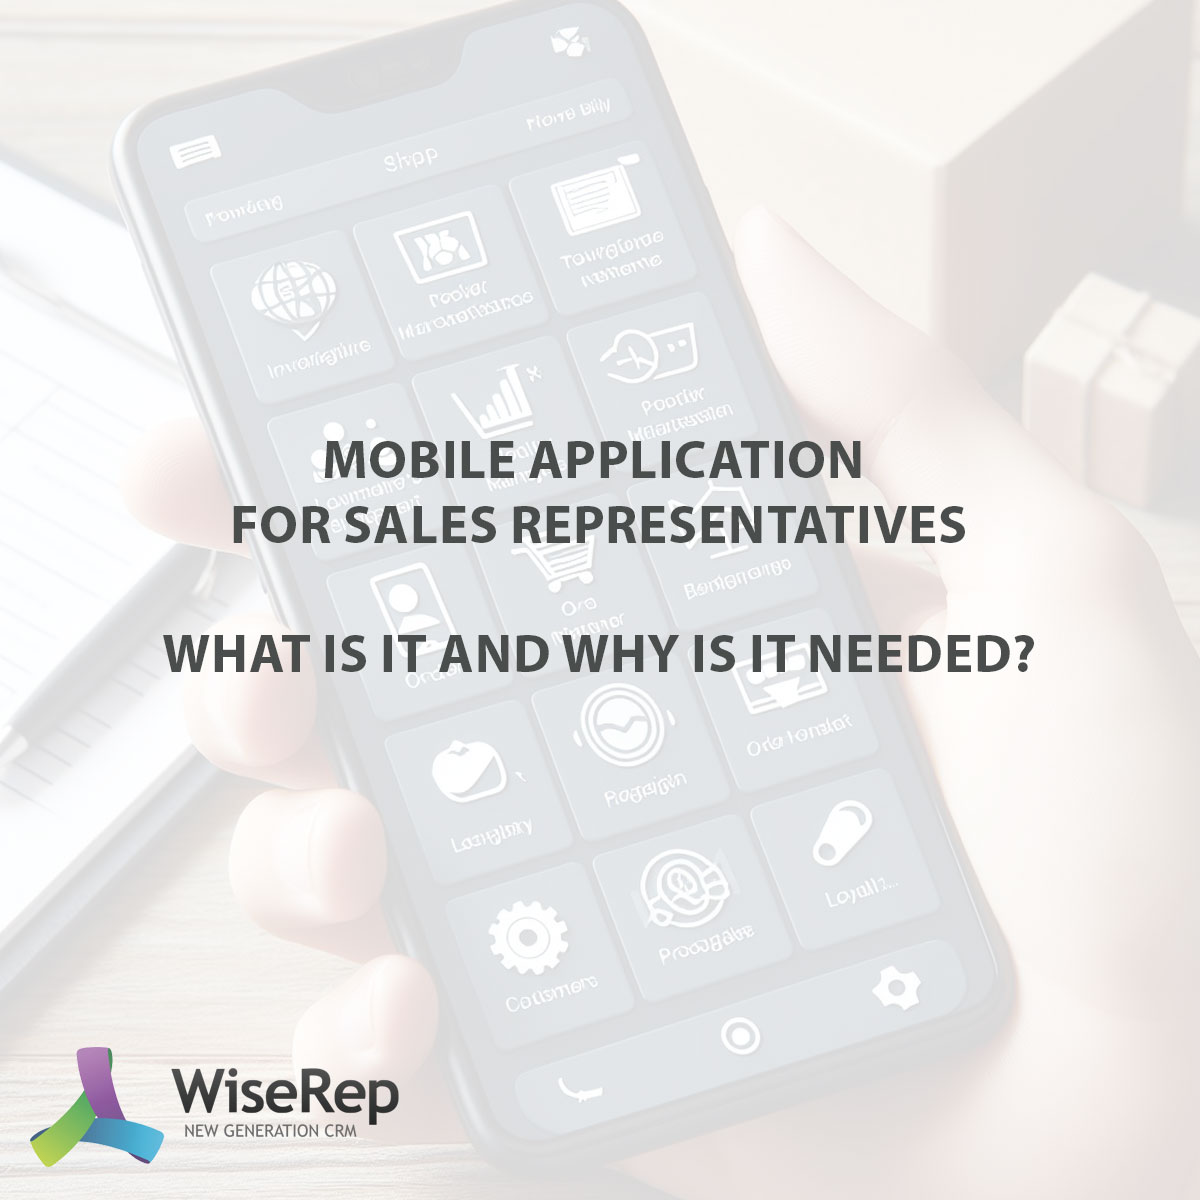 Mobile application for sales representatives: what is it and why is it needed?